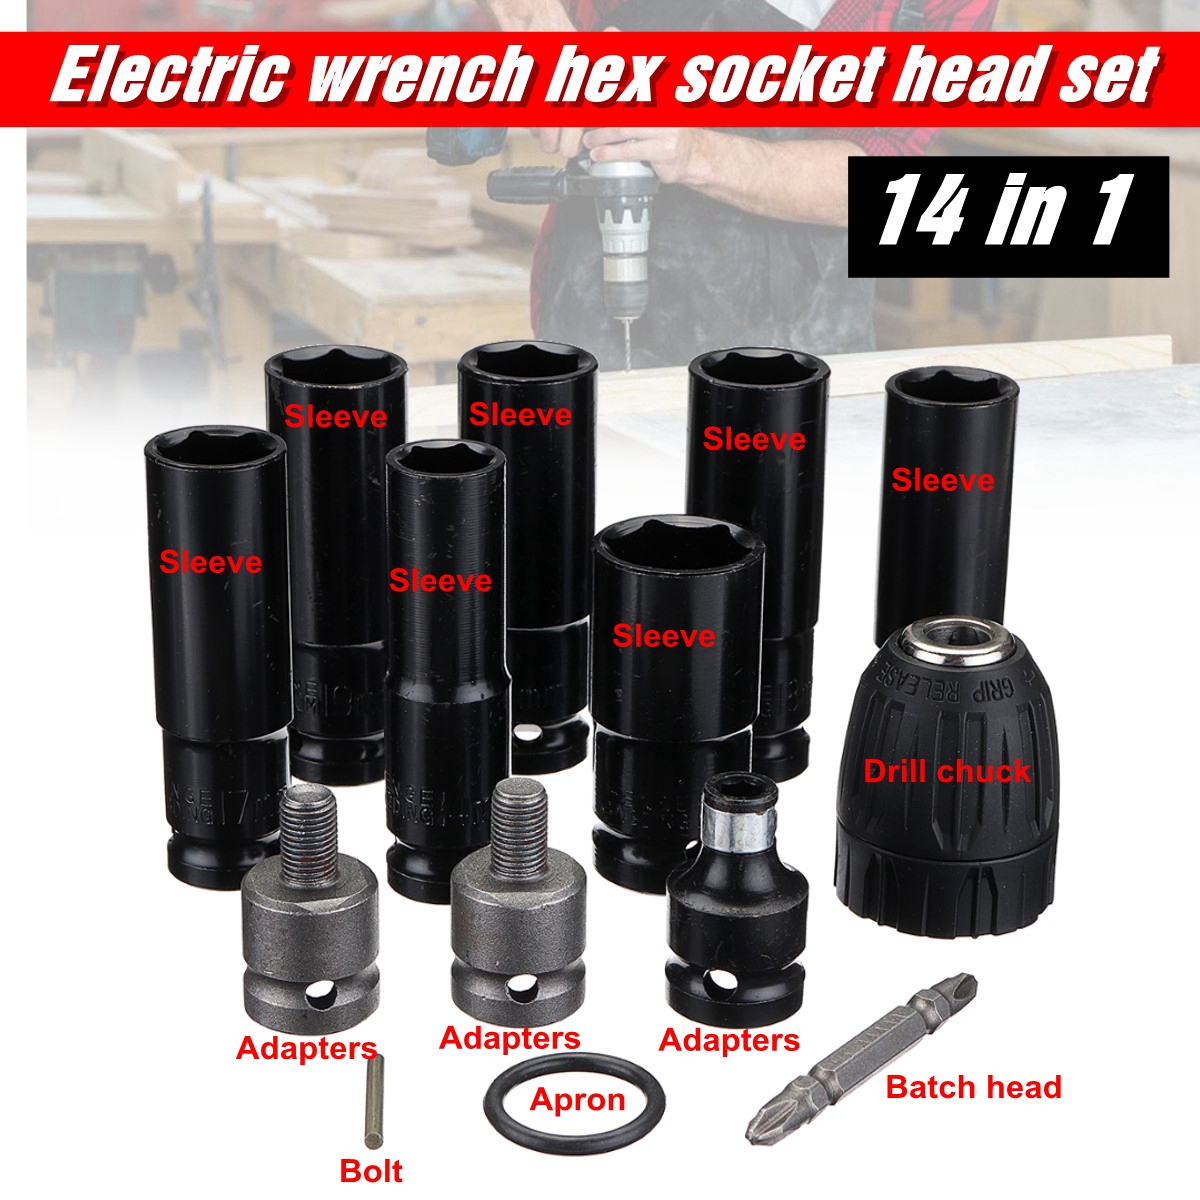 10pcs-Electric-Wrench-Screwdriver-Hex-Socket-Head-Kits-Set-for-Impact-Wrench-Drill-1574997-1